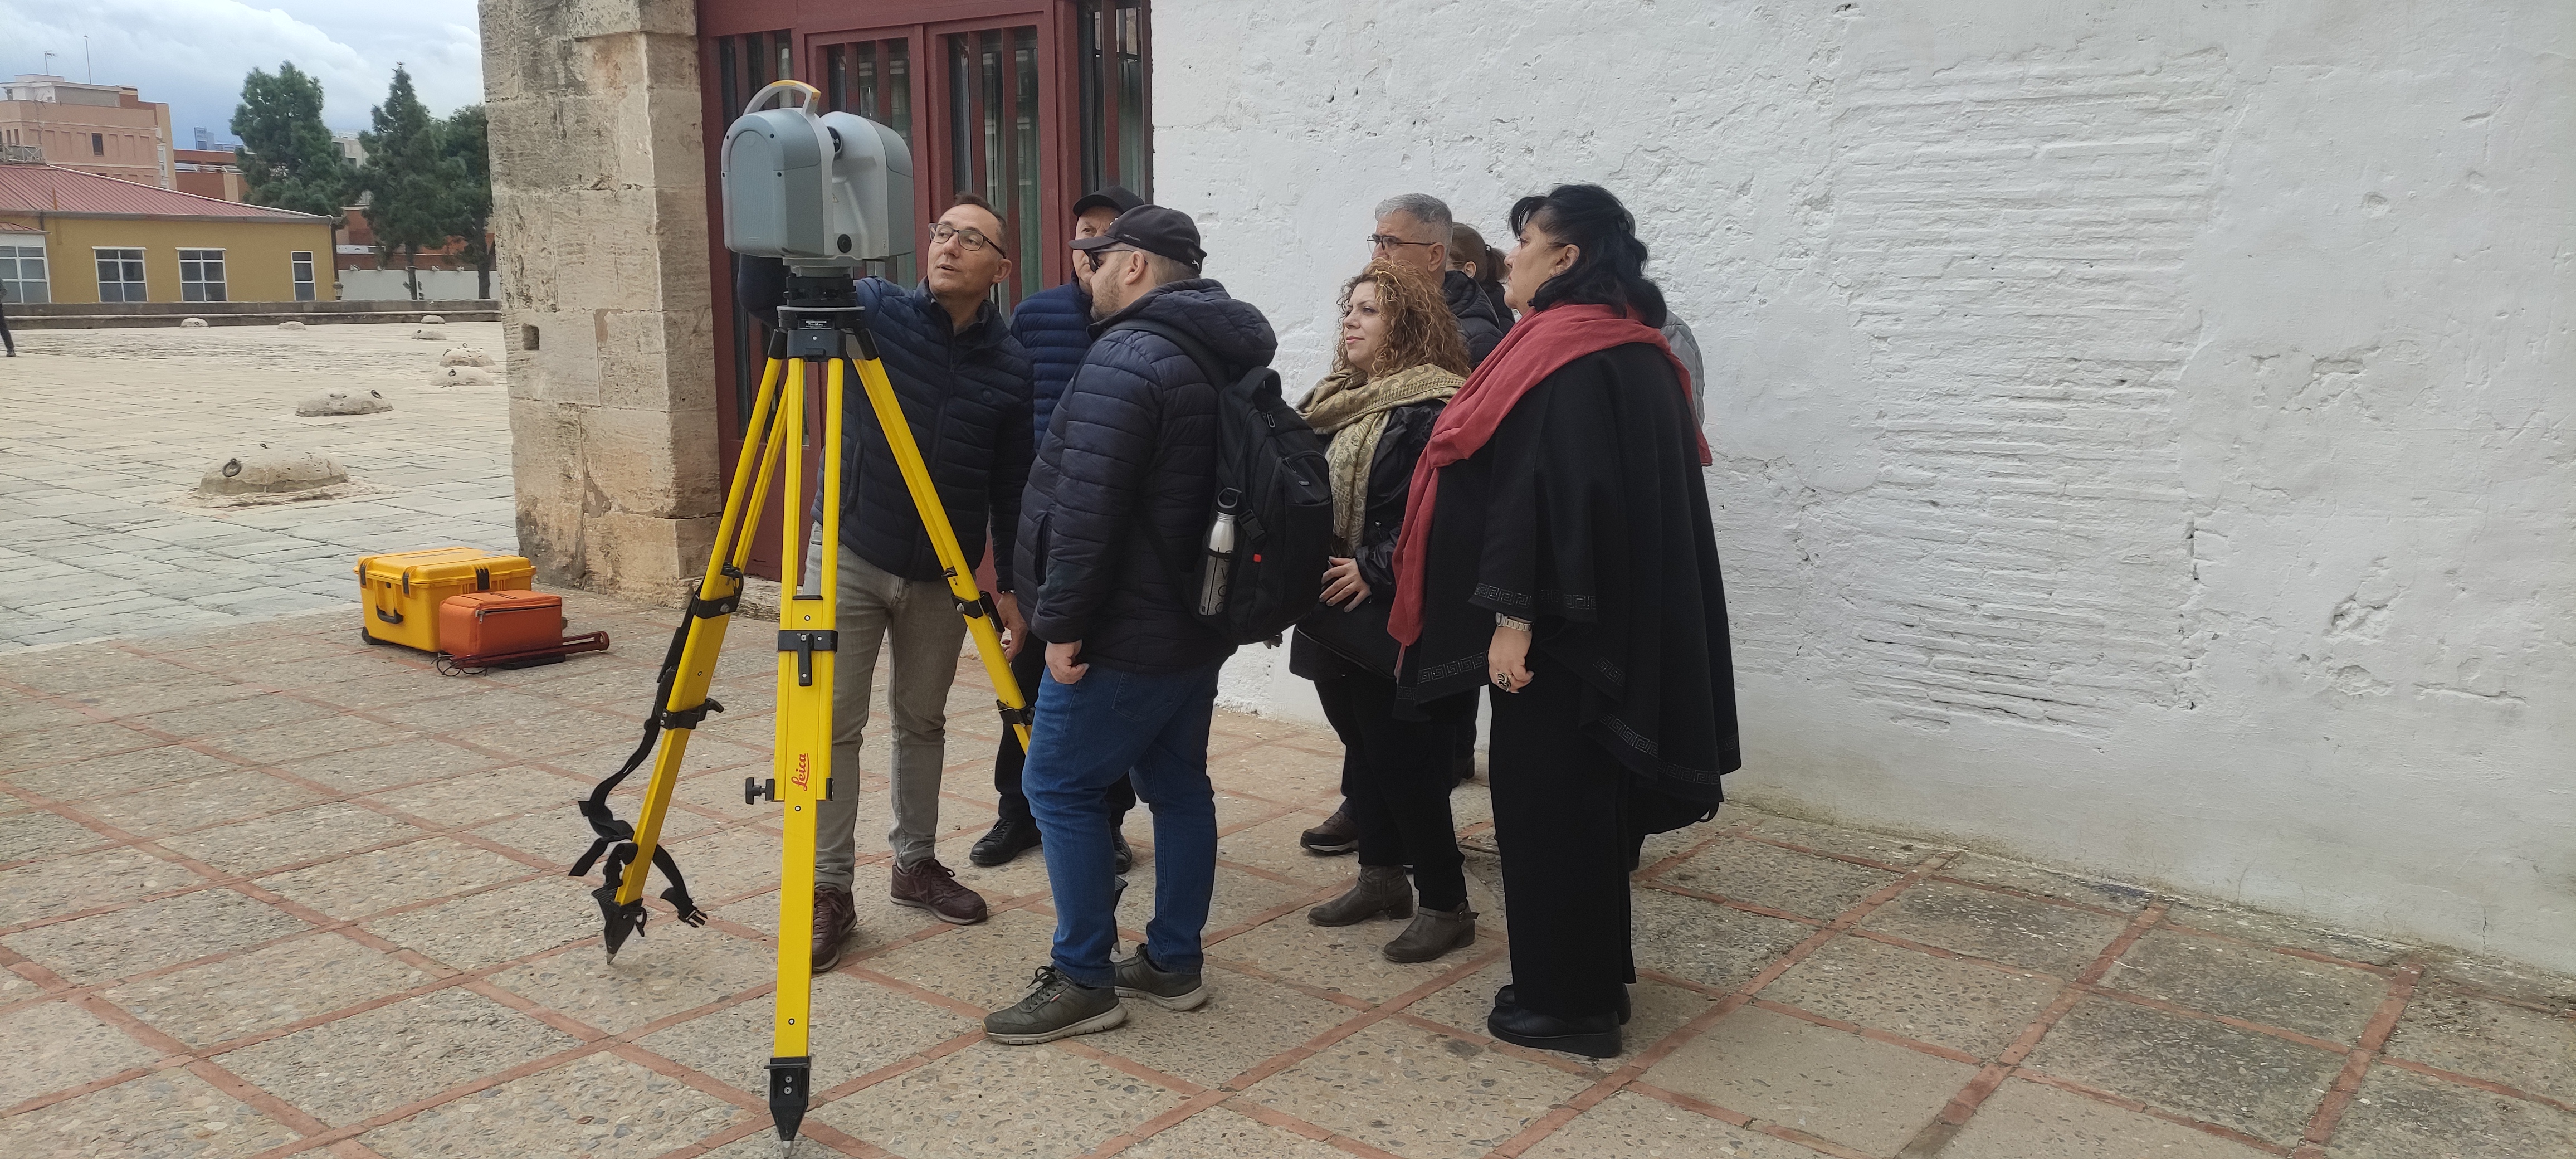 Technical Training “GIT for Cultural Heritage” in Valencia (Spain)